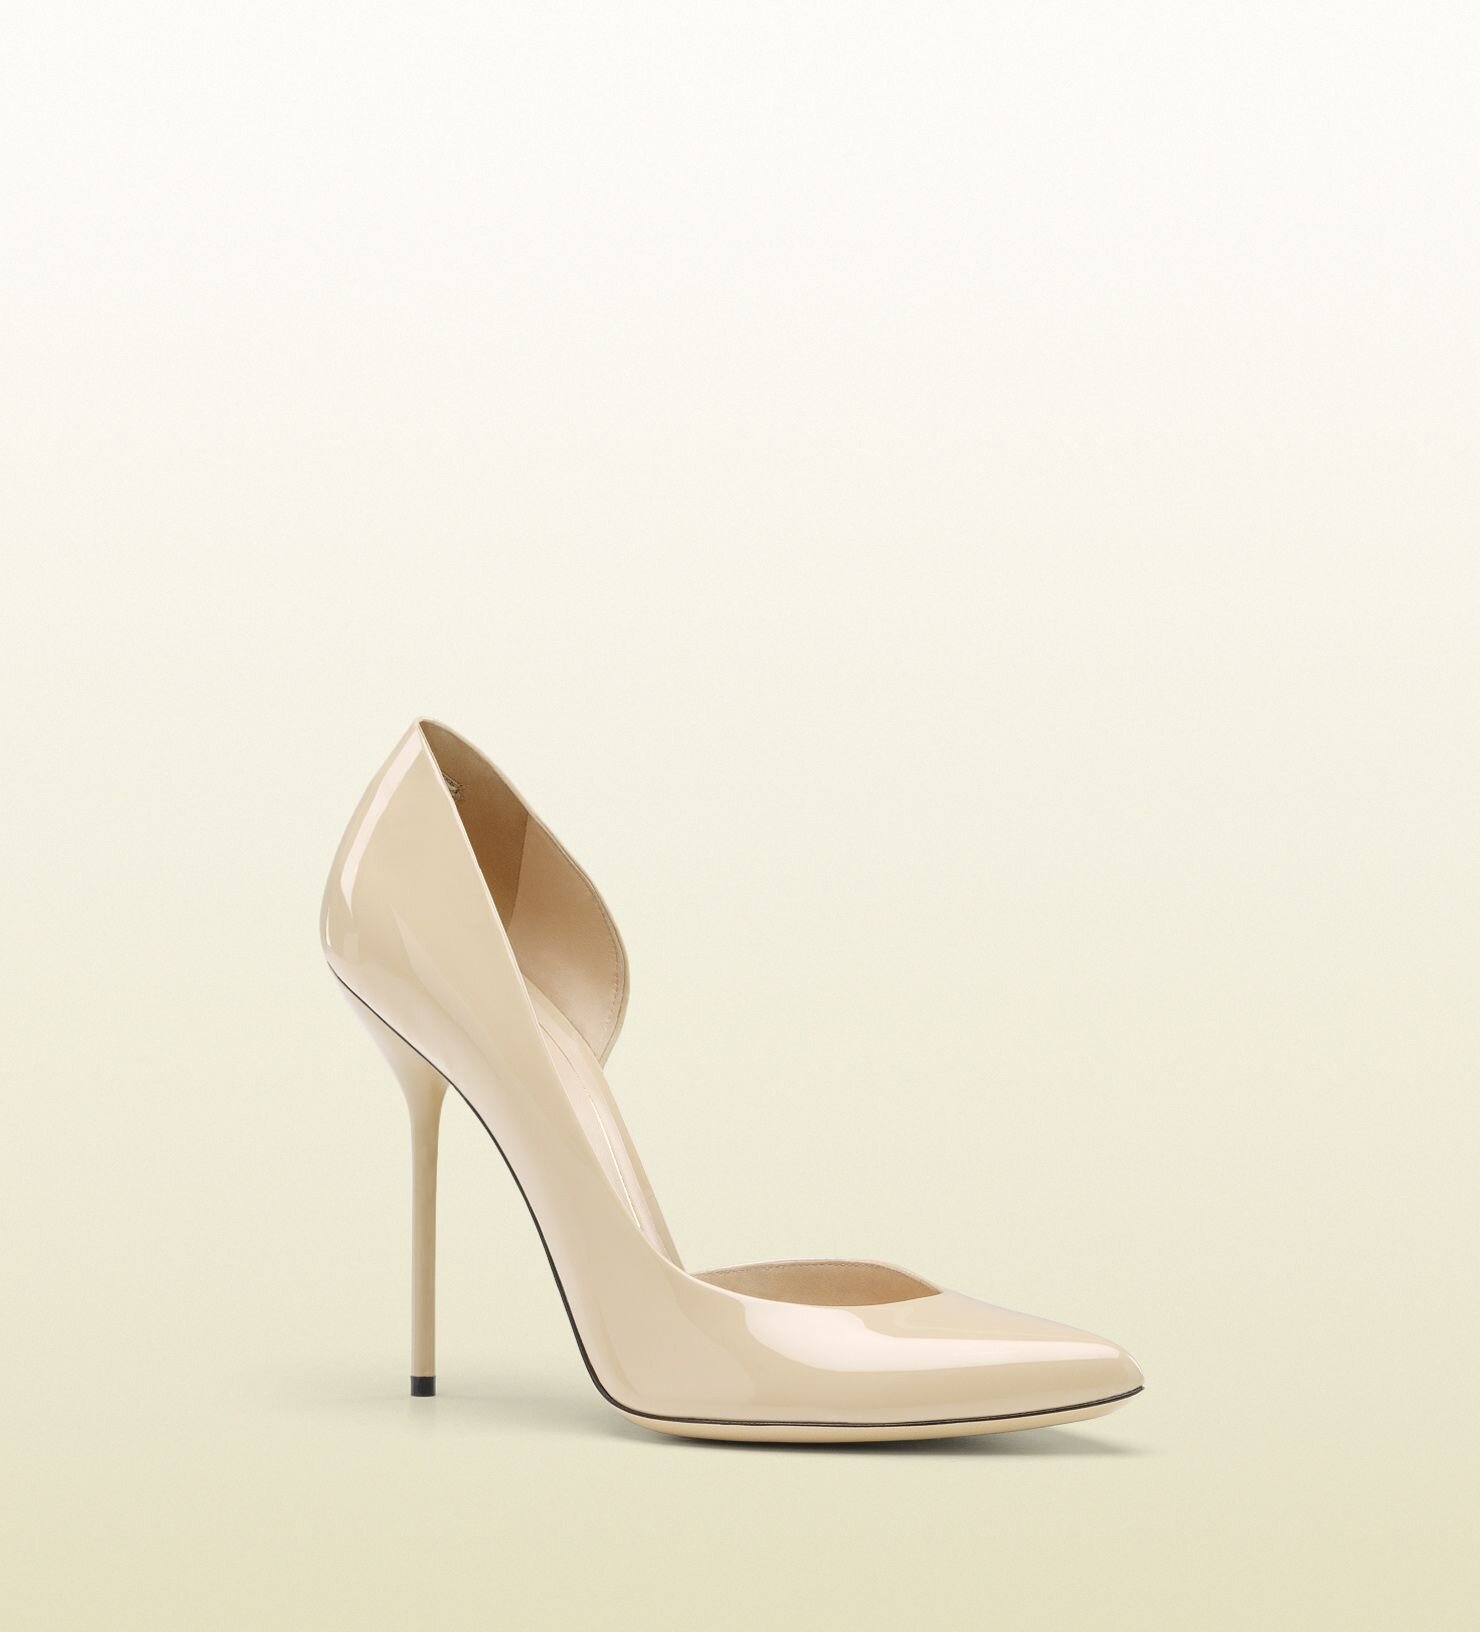 Gucci Noah D'Orsay Pumps in Natural Patent Leather.jpg